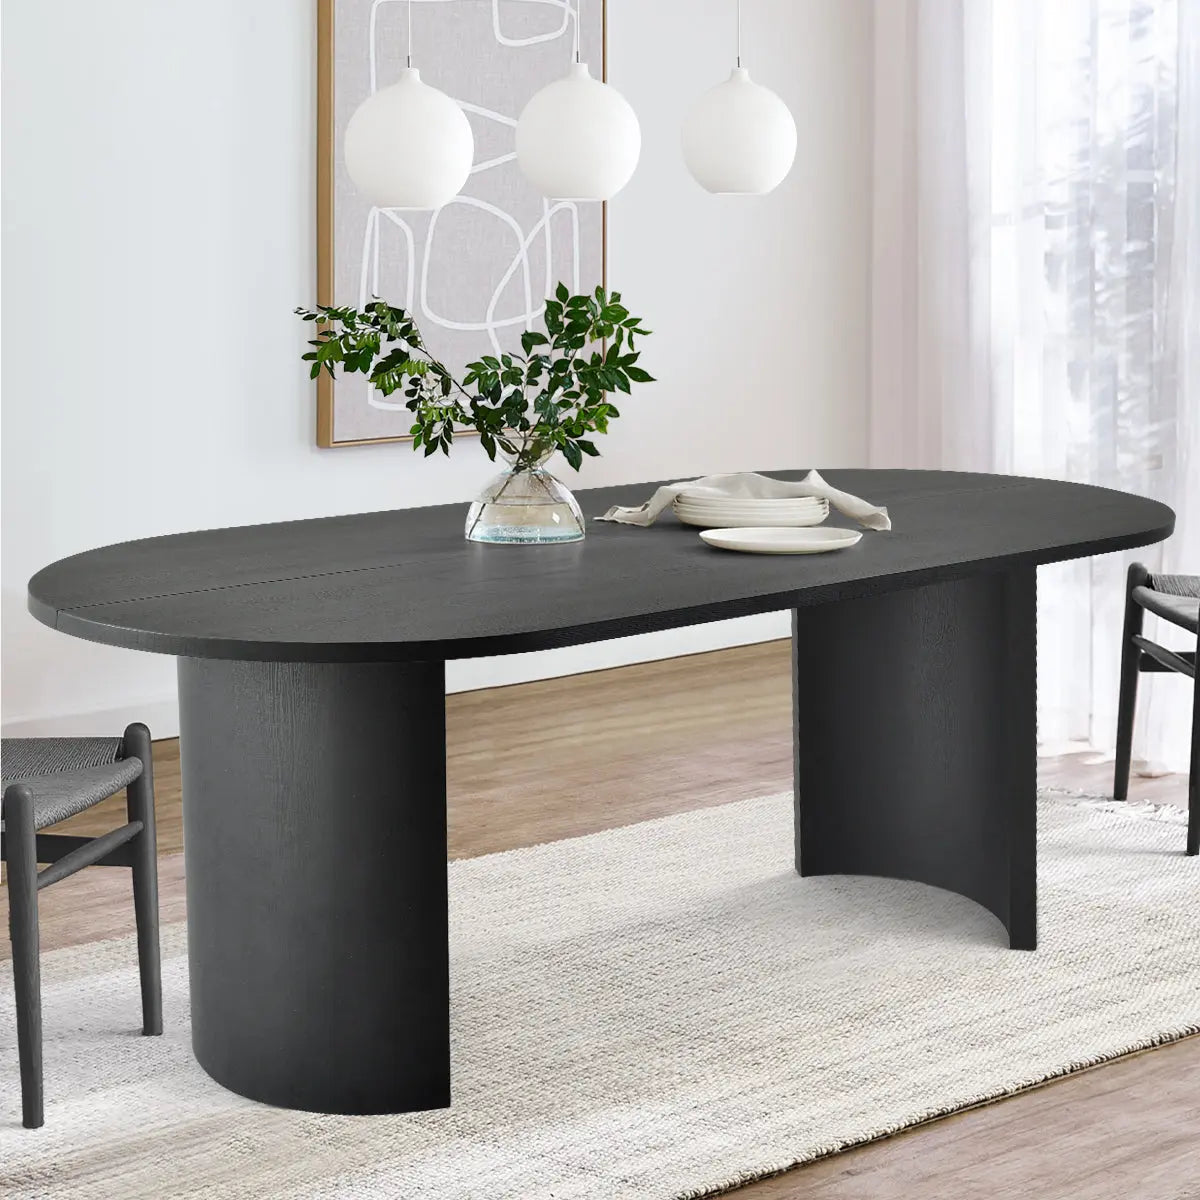 Dwen 79" Oval Dining Table The Pop Maison